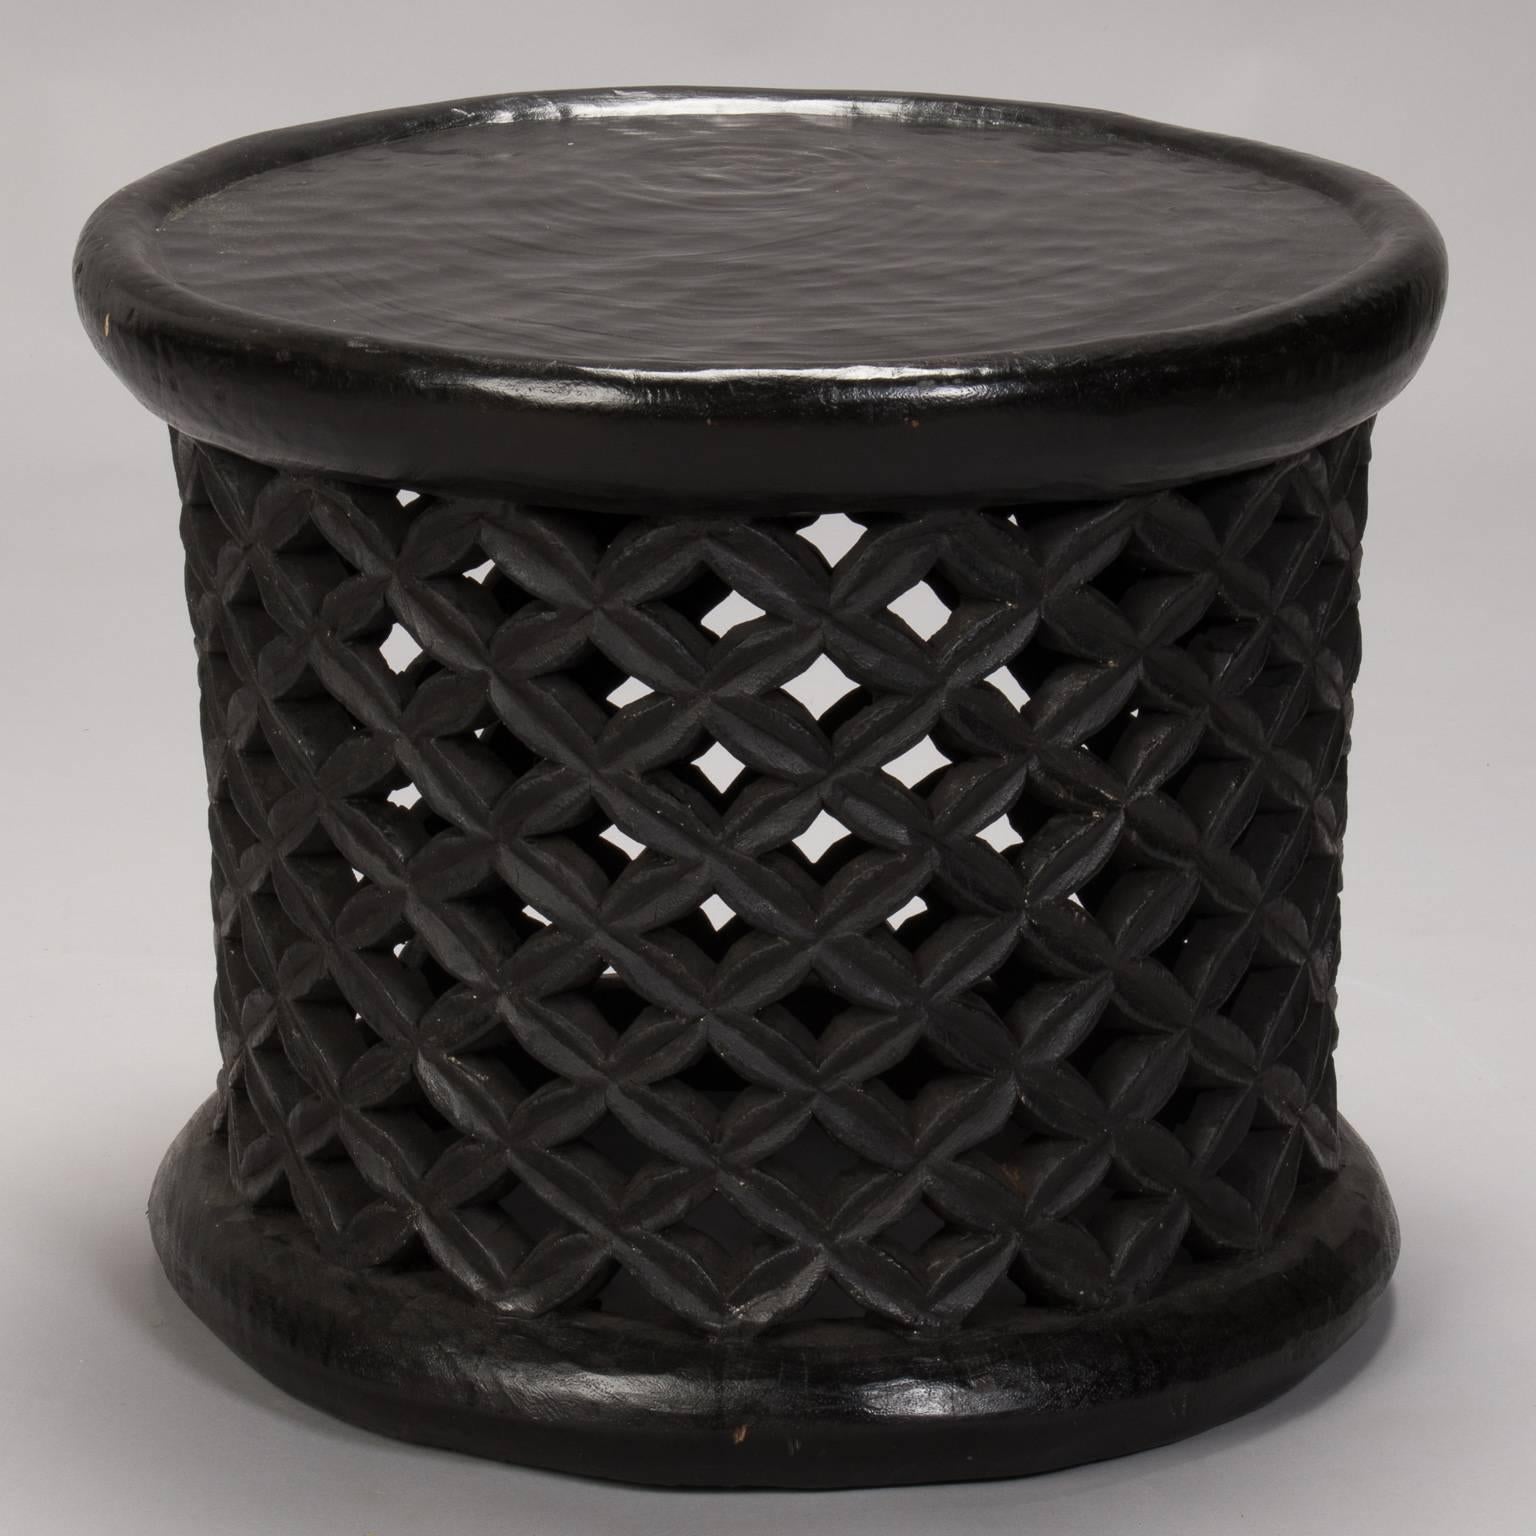 Tribal Bameleke Grid Pattern Carved Table or Stool from Cameroon